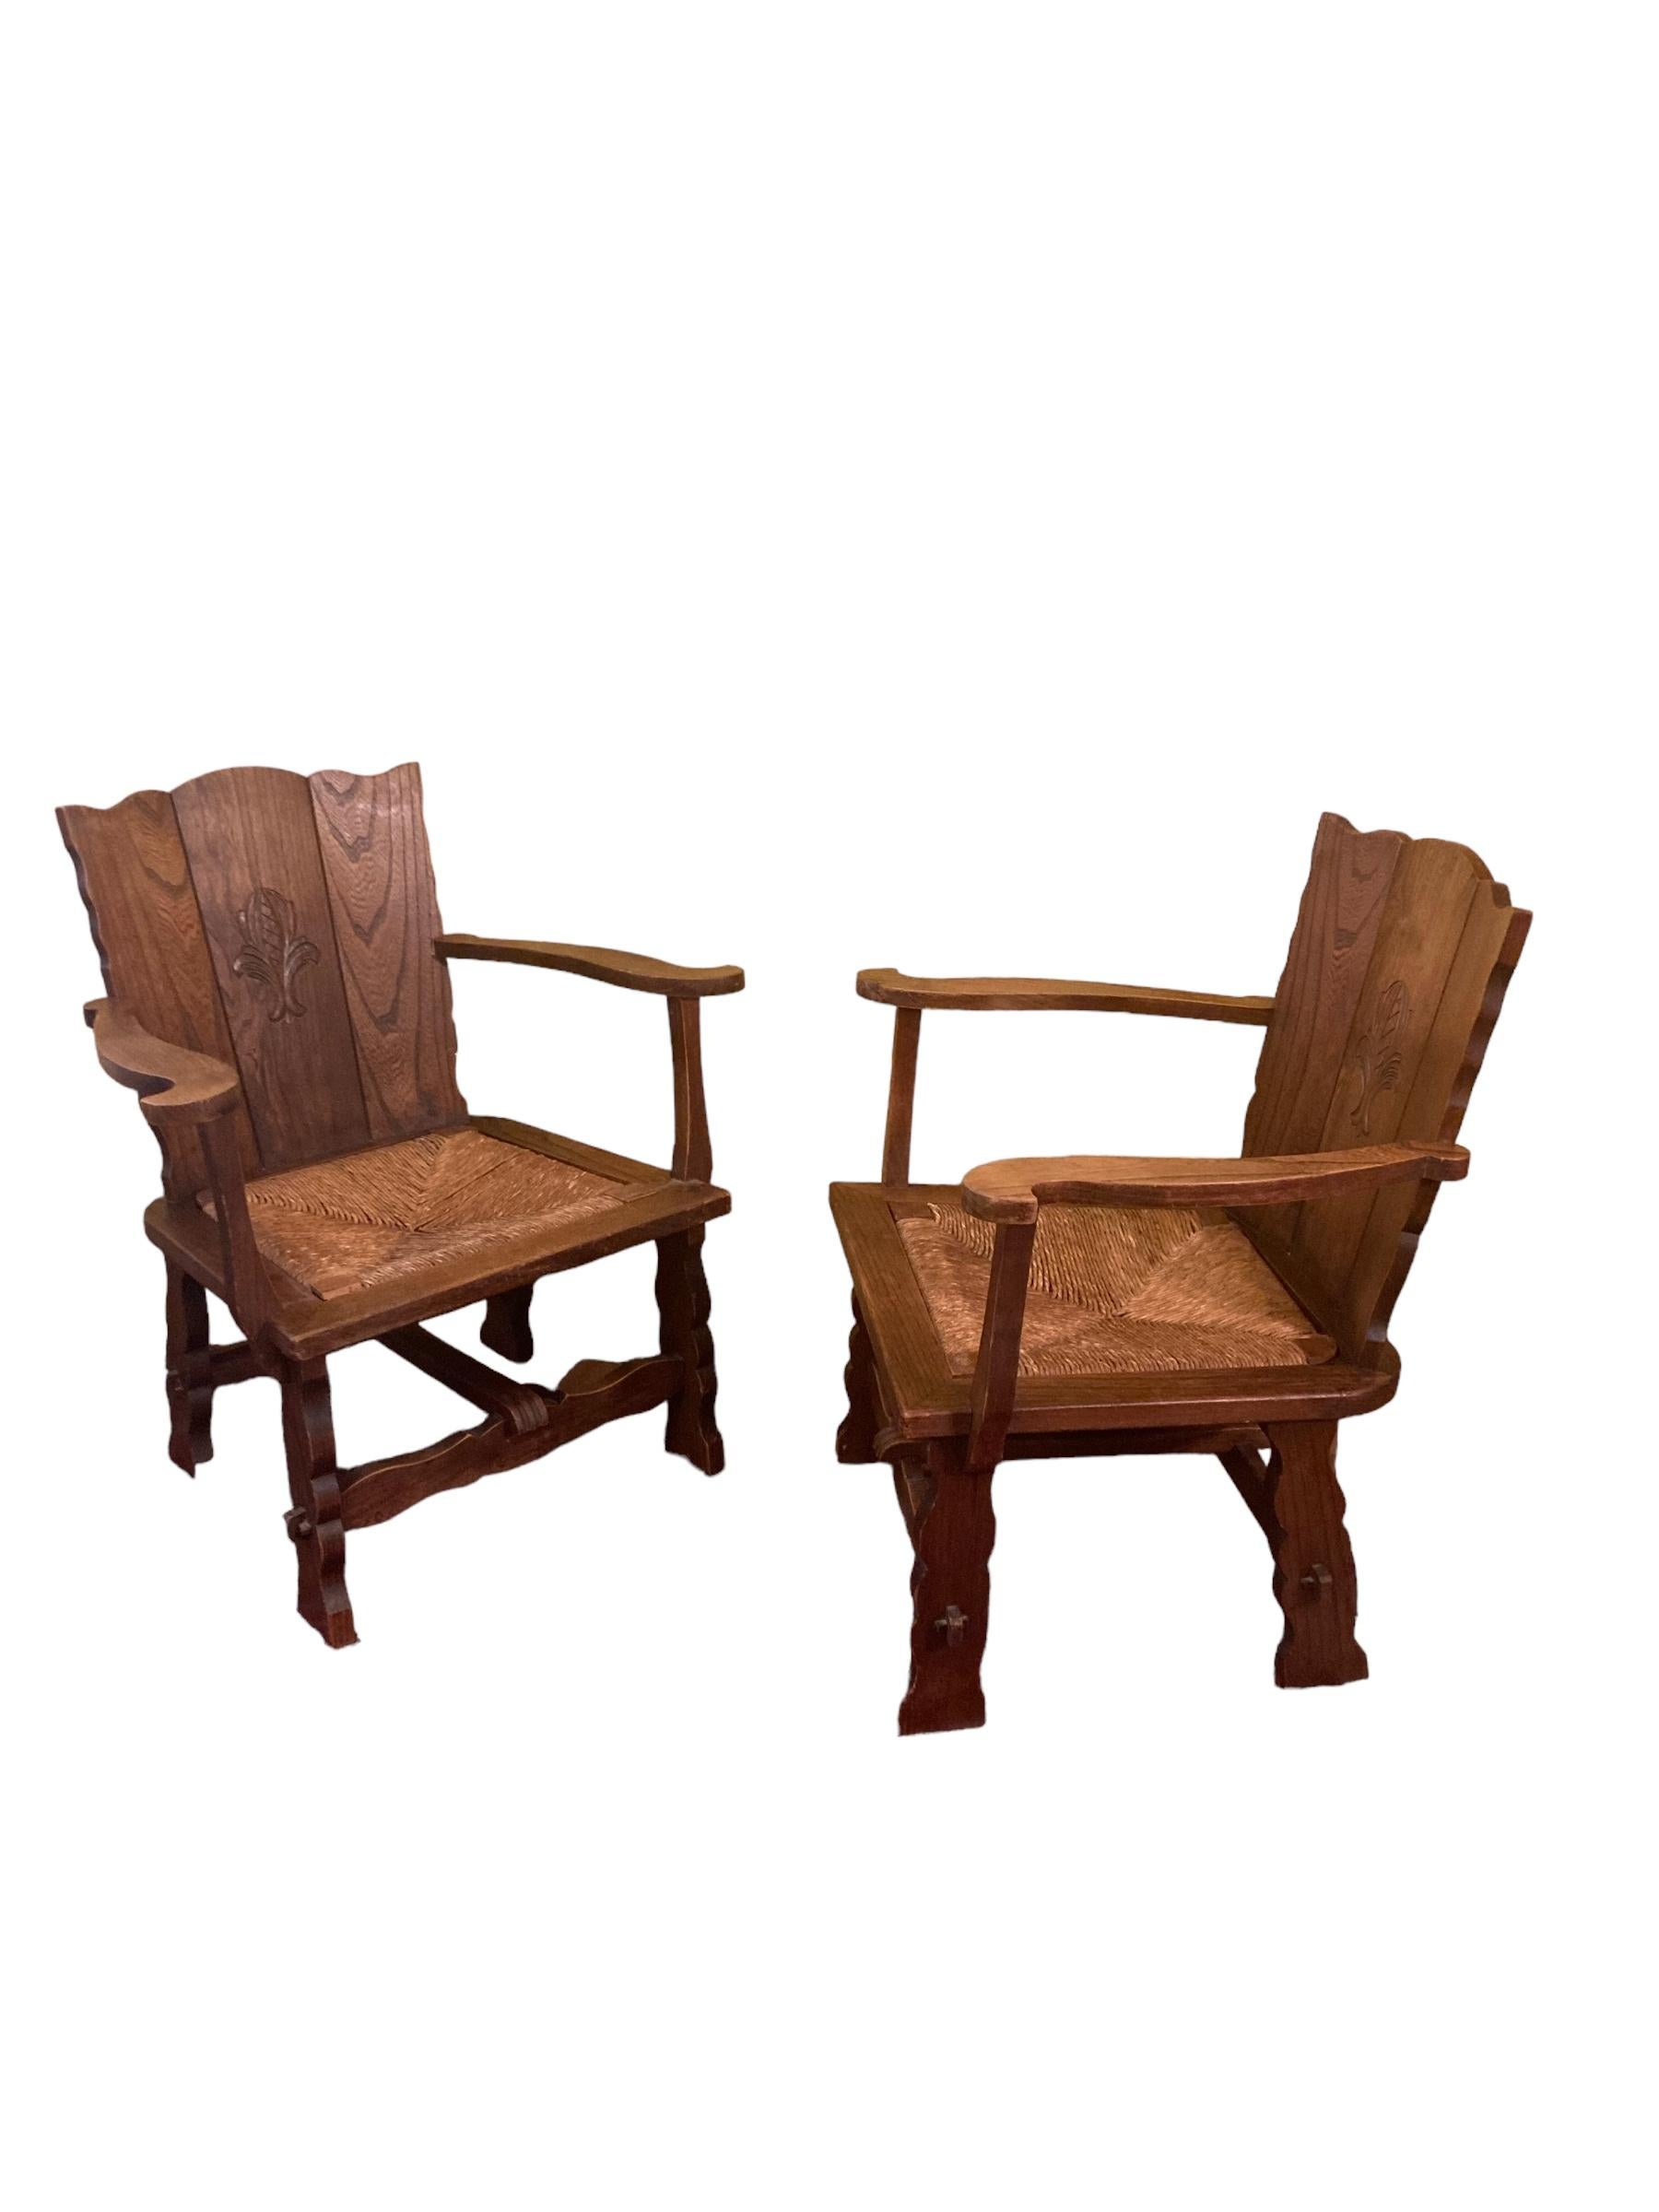 Set of Two Brutalist Wabi Sabi Oak Rush Lounge Chairs. Besigned with both comfort and style in mind. Crafted from Oak these chairs feature a sturdy frame, a comfortable seat, and a supportive backrest. Its timeless design seamlessly blends with any